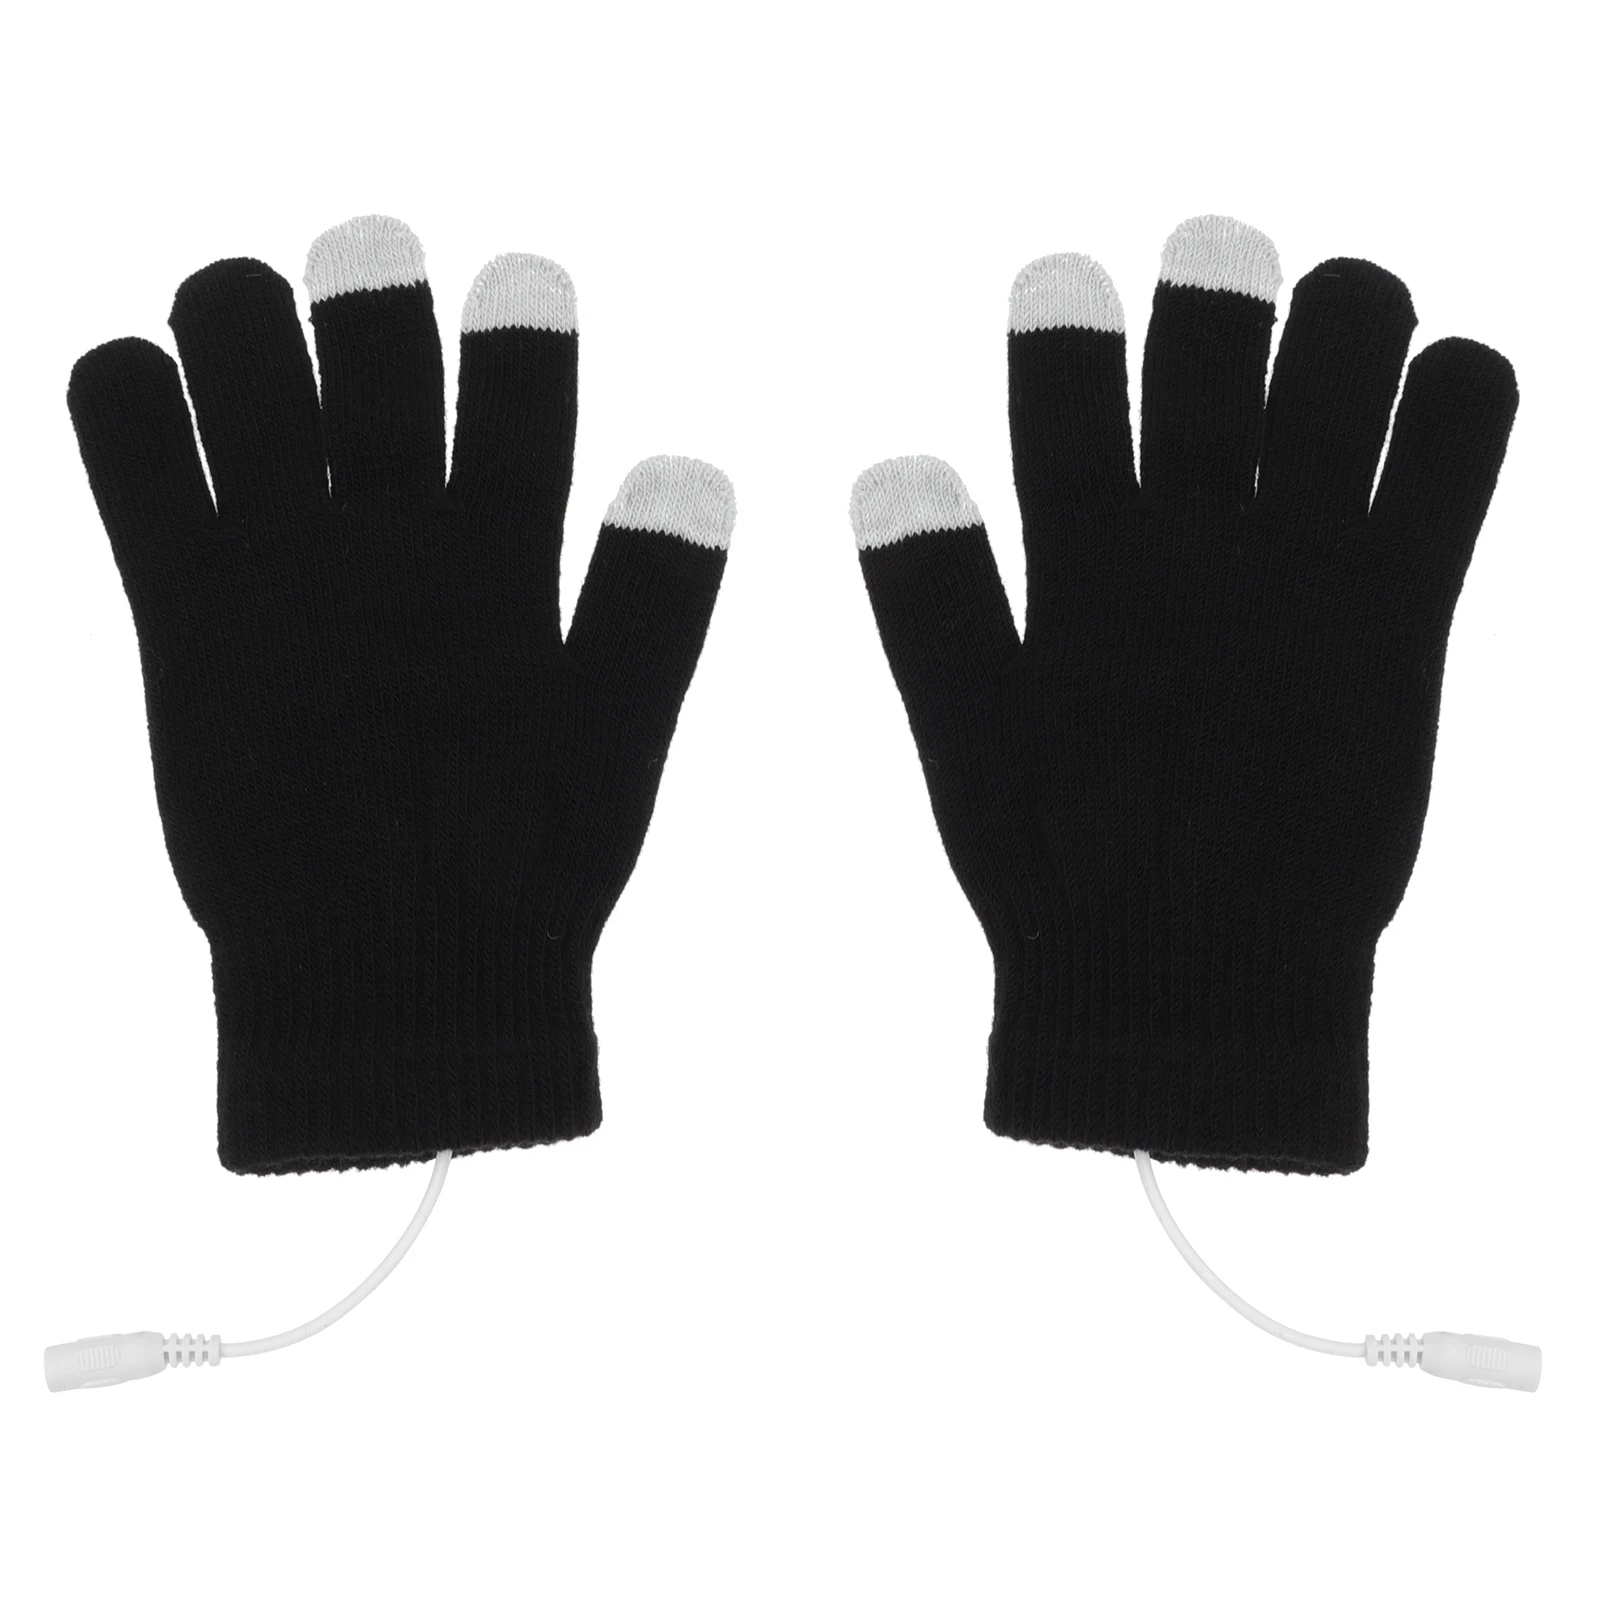 Heating Gloves USB Heated Touch Screen Mittens Cotton Gloves Unisex Winter Typing Touch Screen Cold Protective Hand Gloves цена и фото